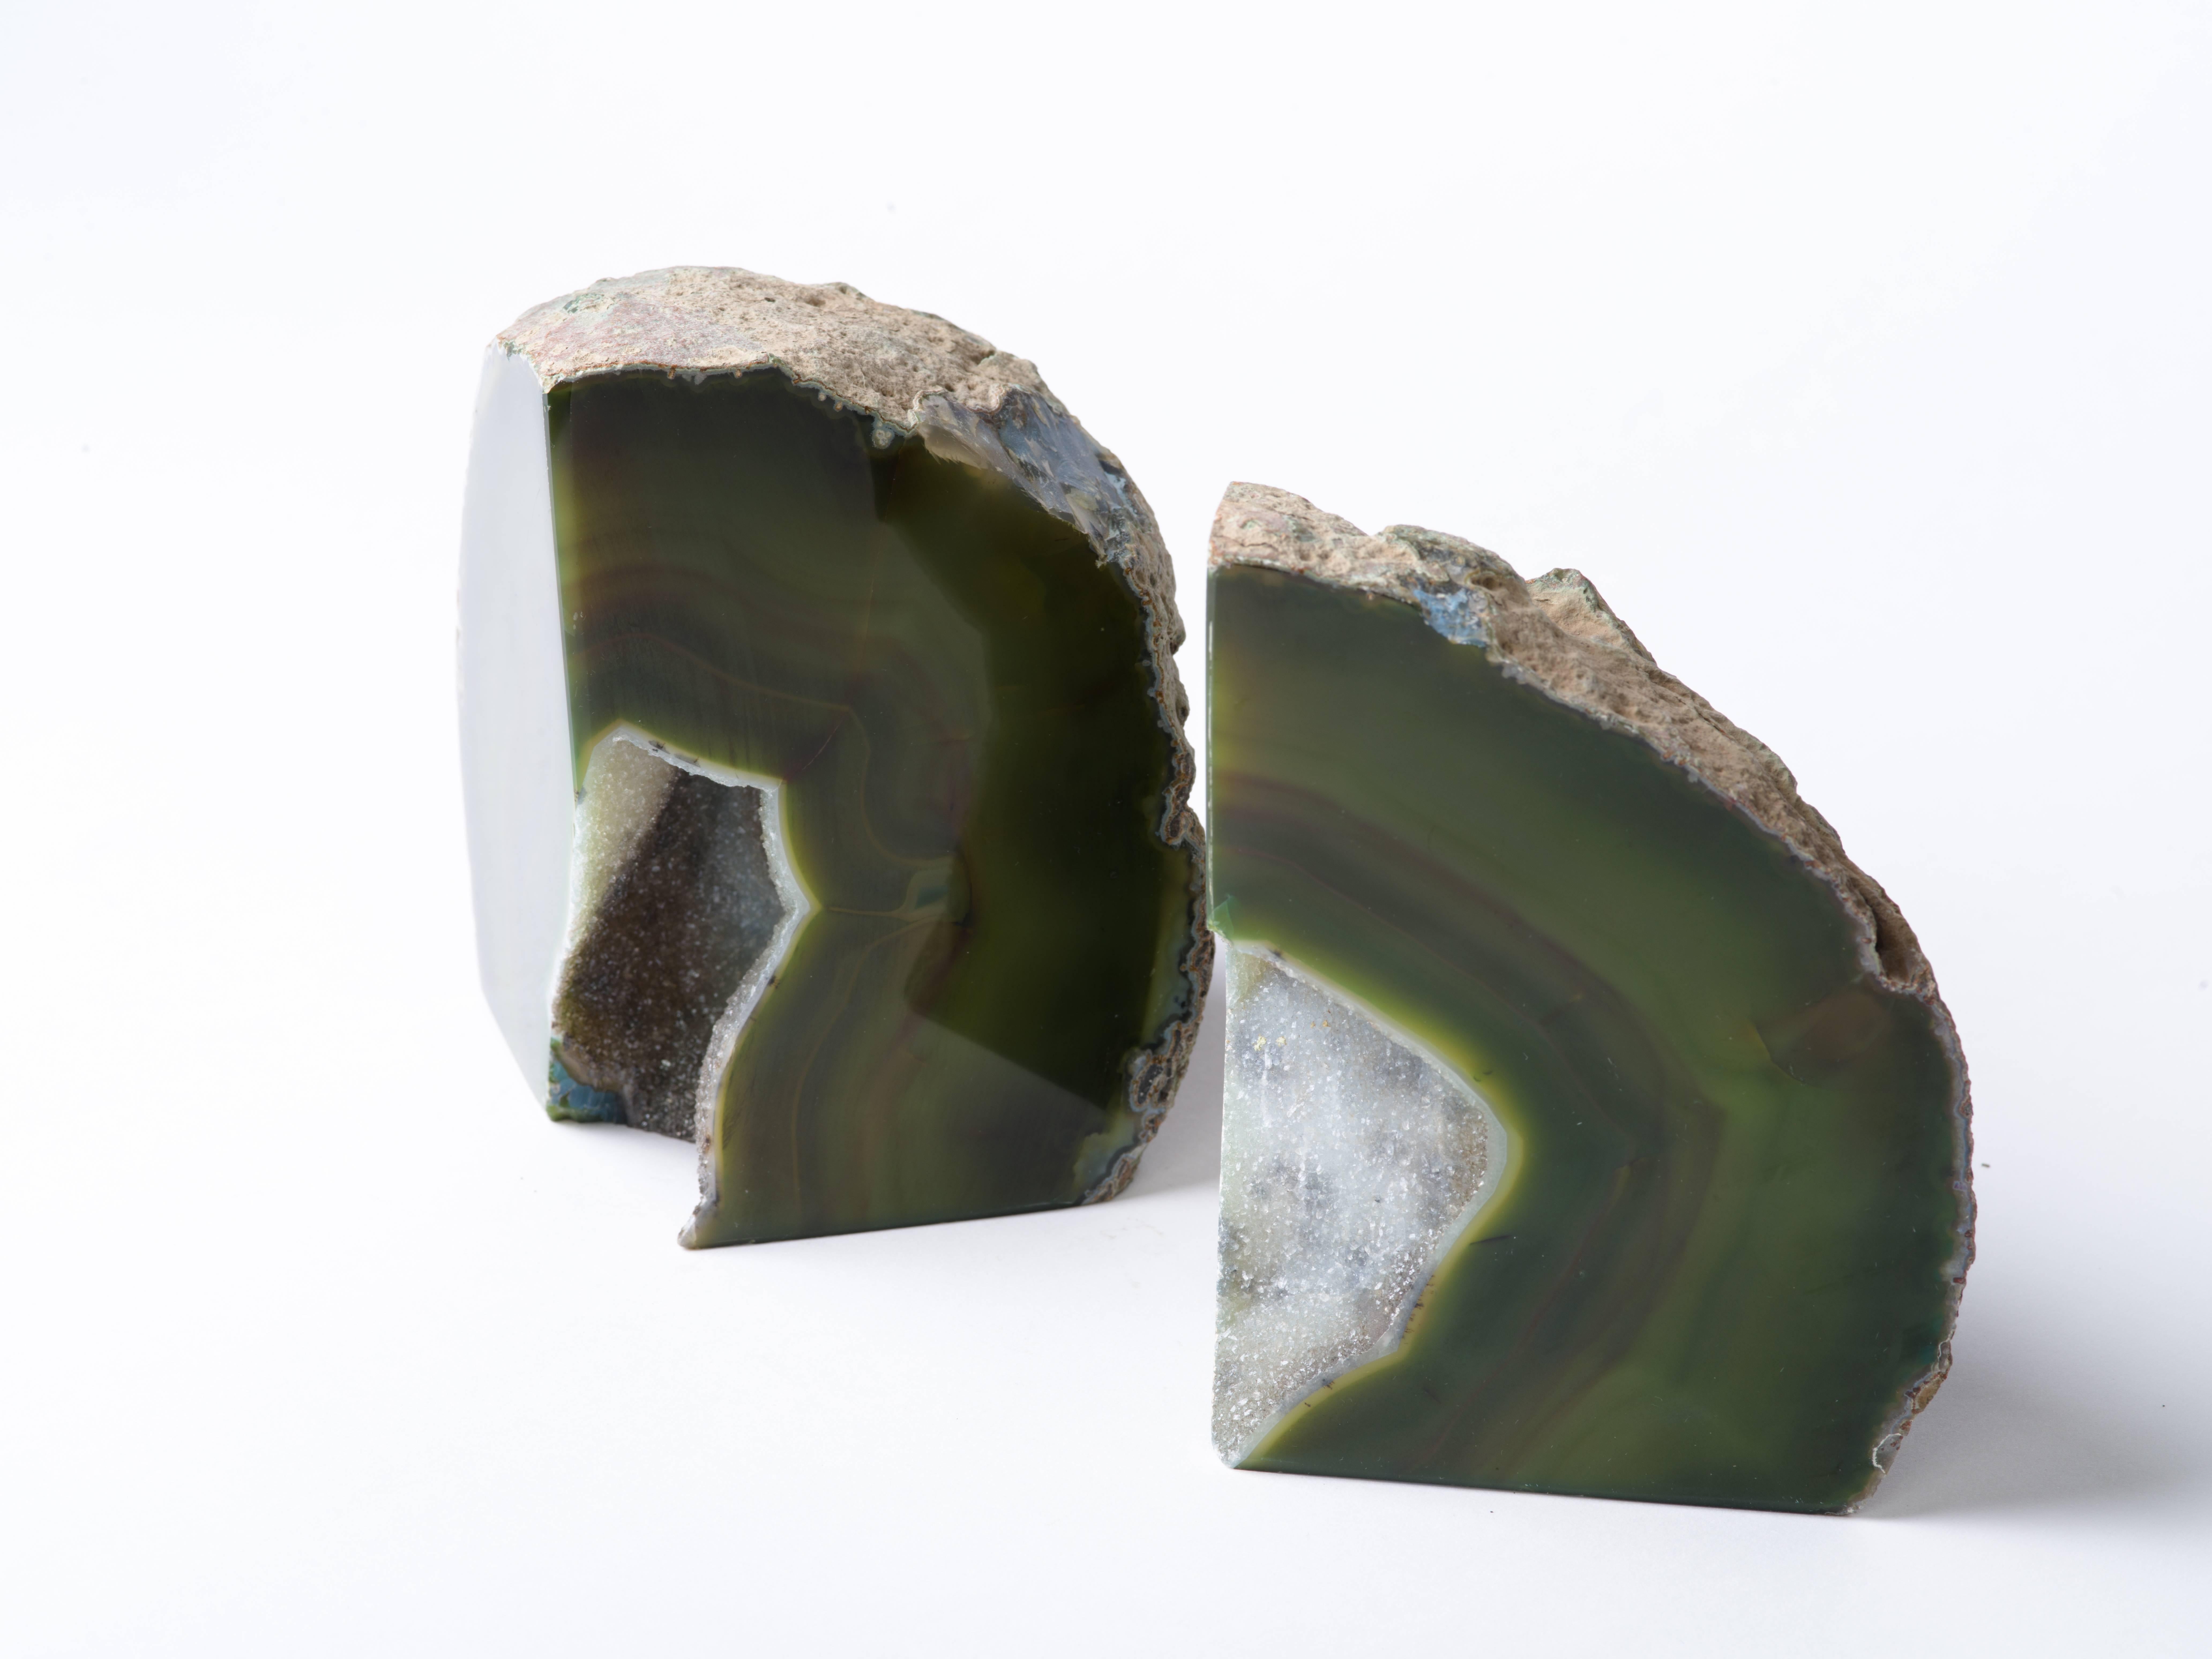 Pair of Organic Modern Agate Stone and Crystal Bookends in Moss Green (Achat)